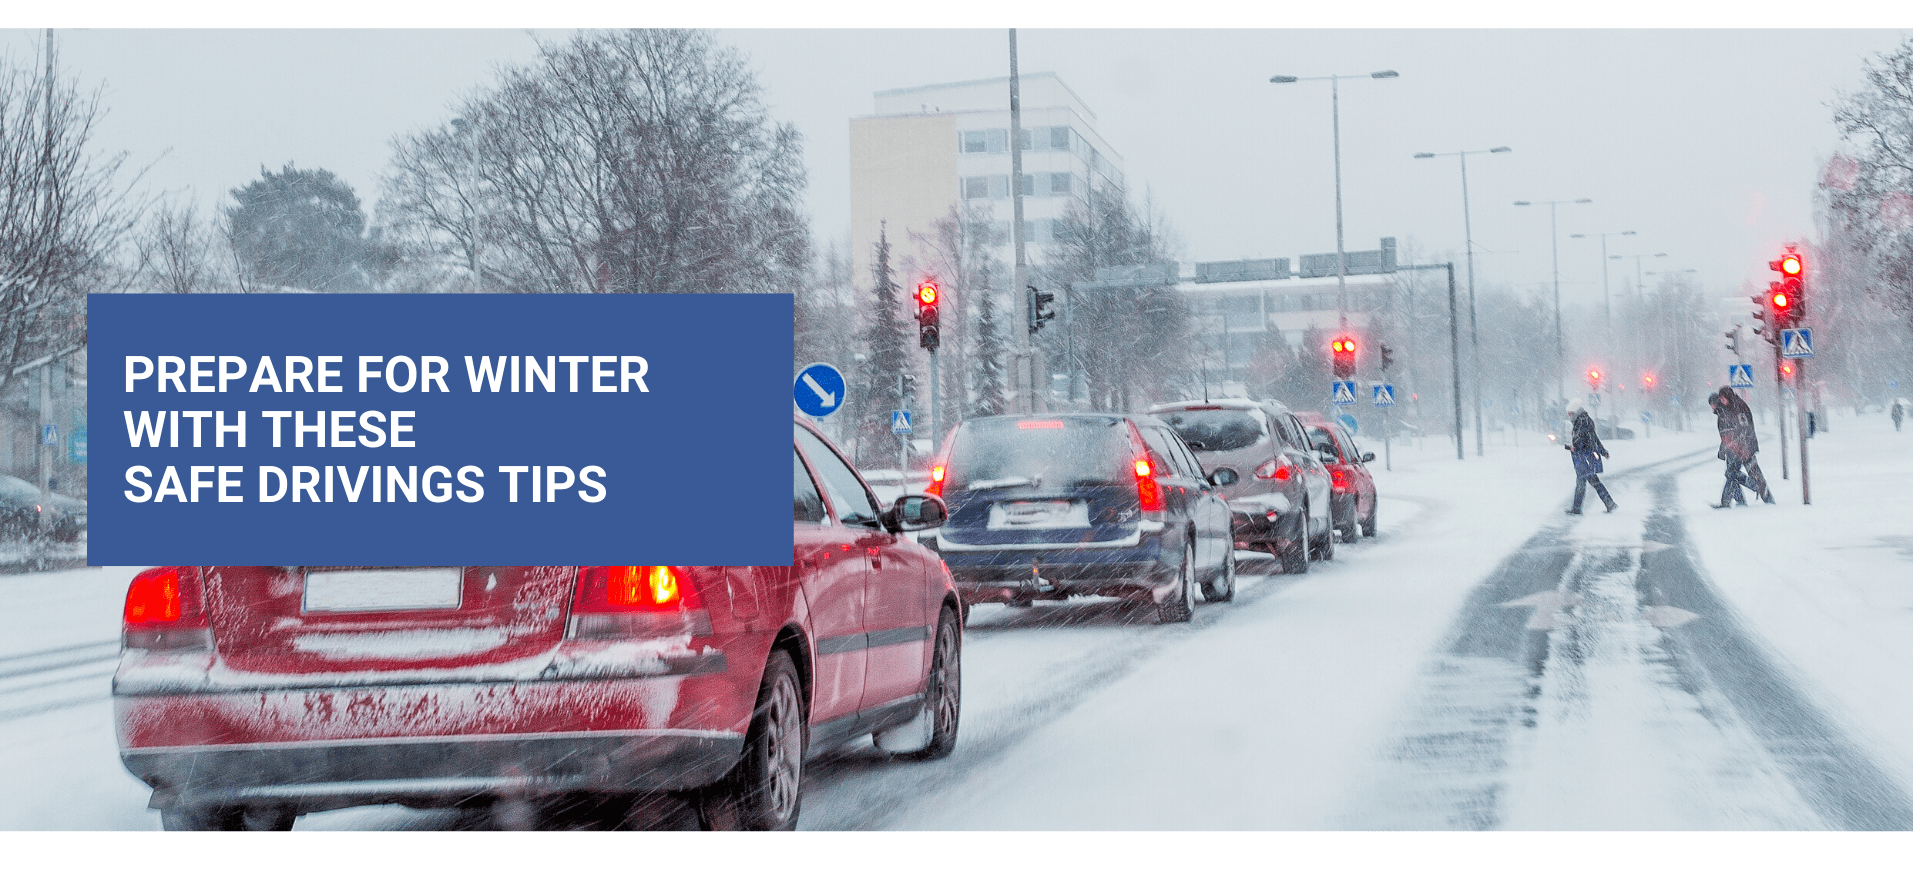 Prepare for Winter with these Safe Driving Tips